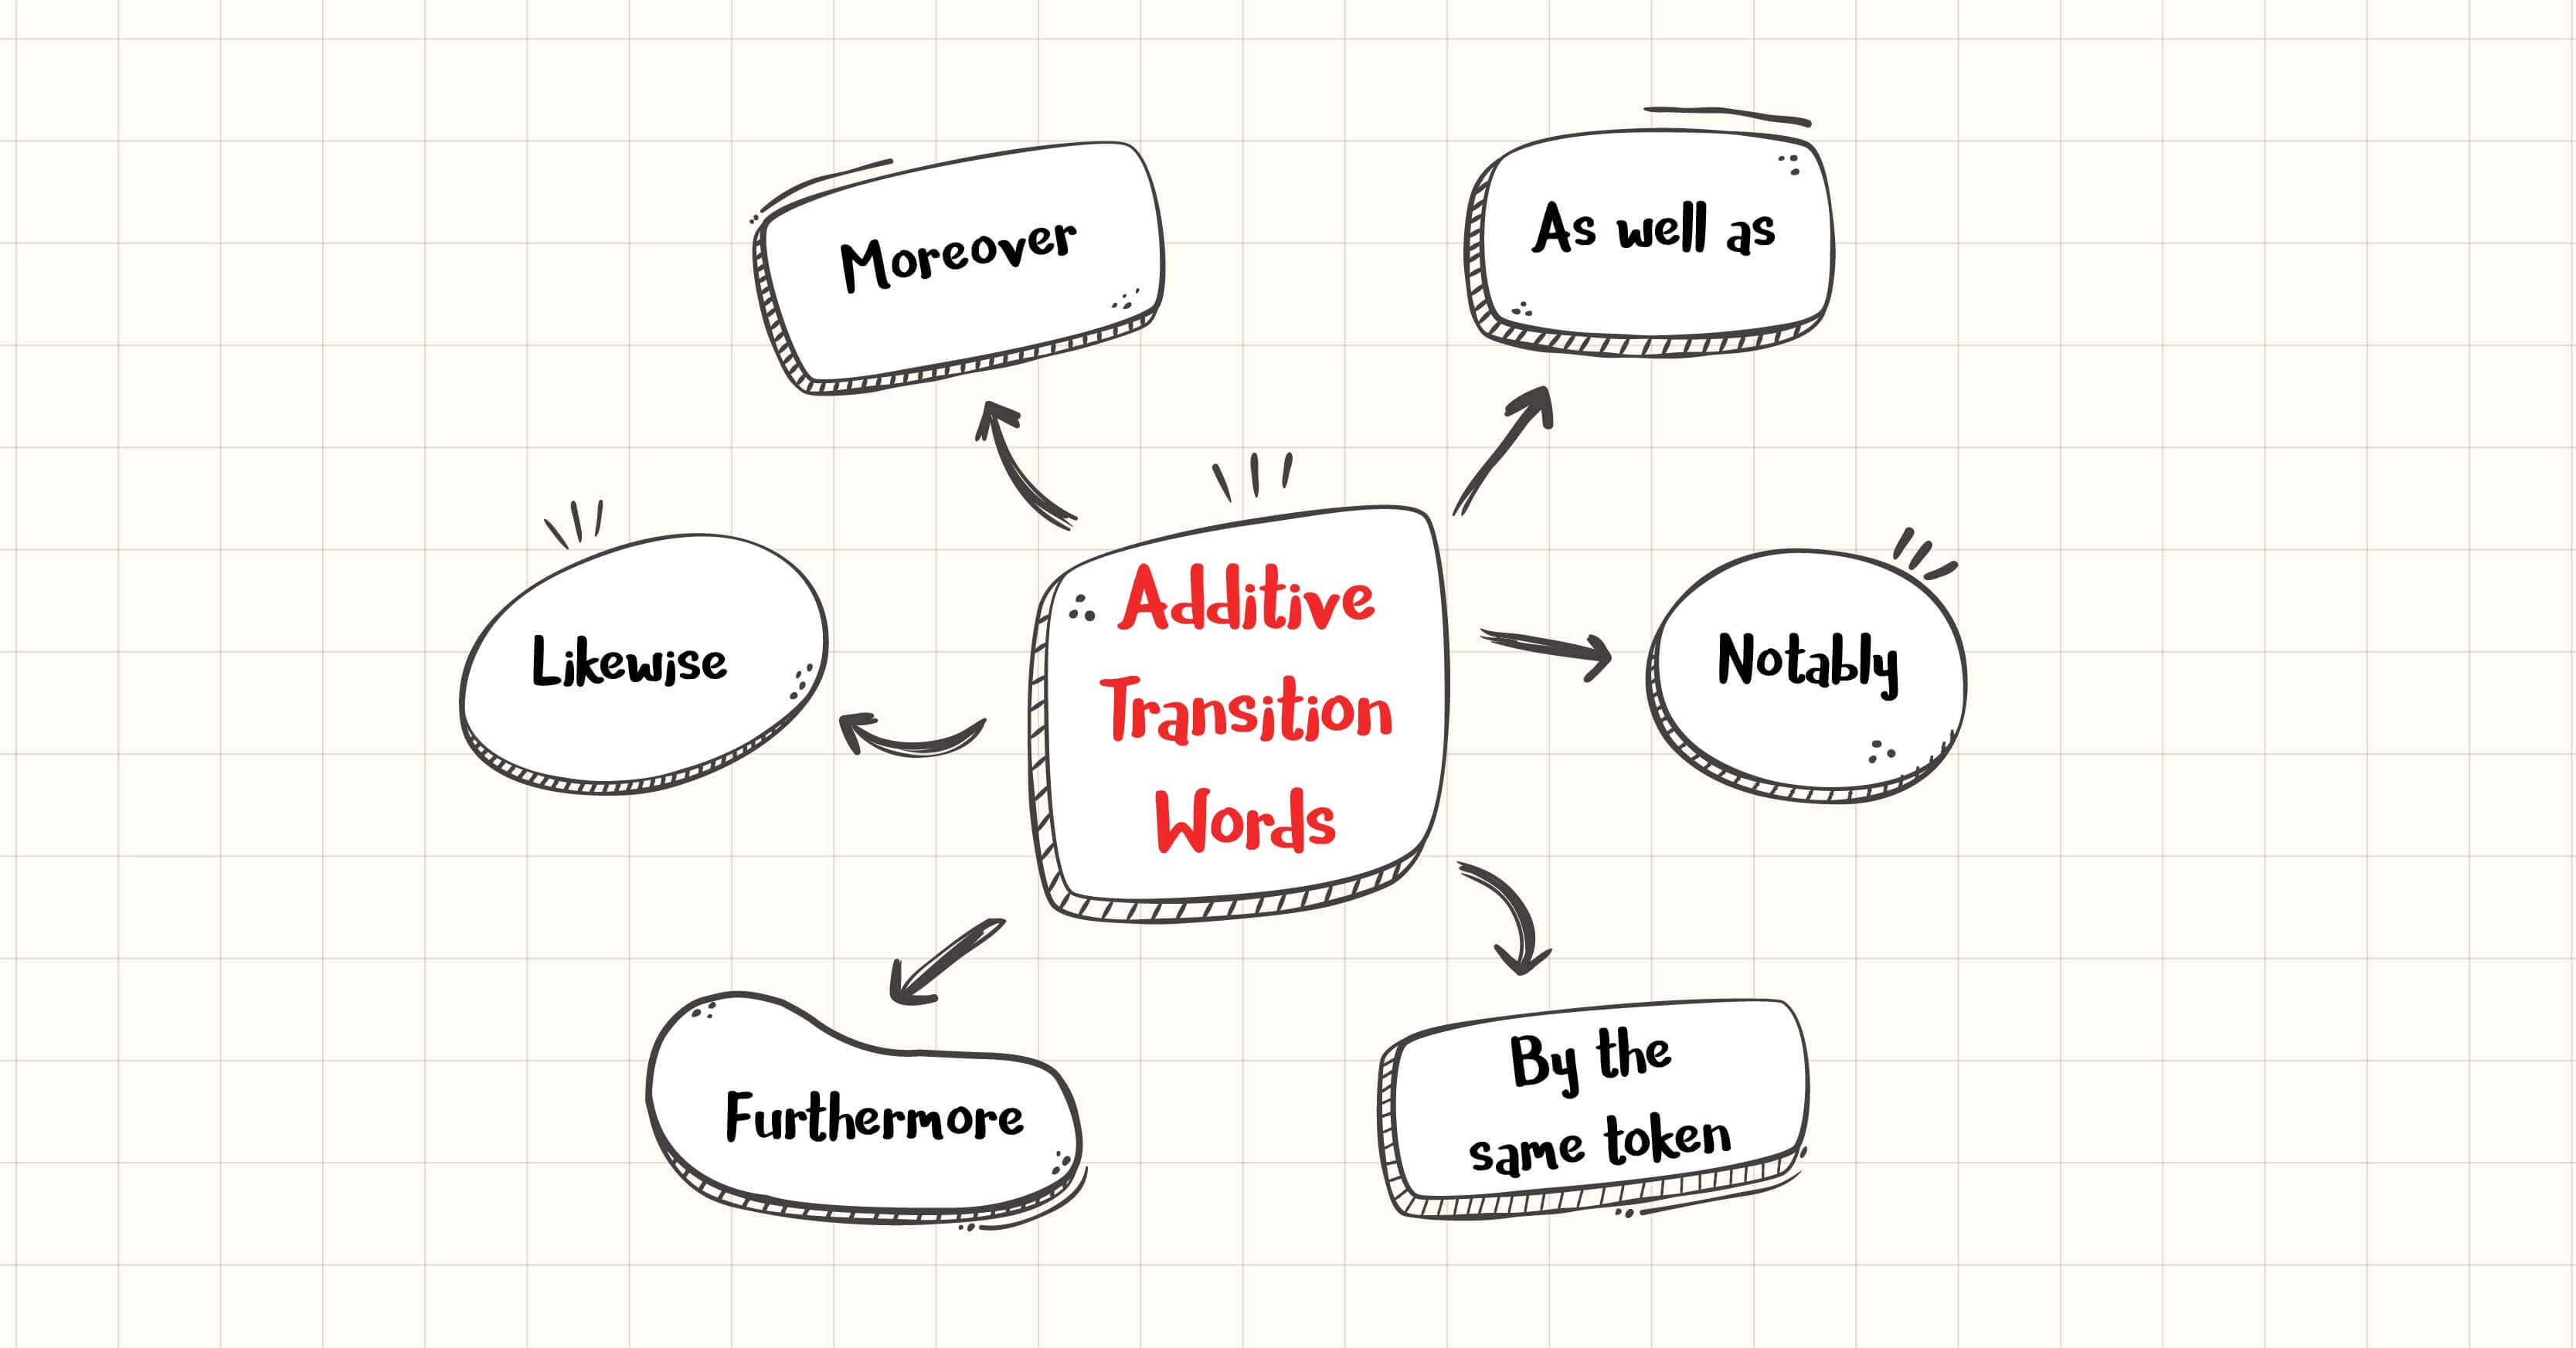 tu noi bo sung additive transition words trong ielts writing